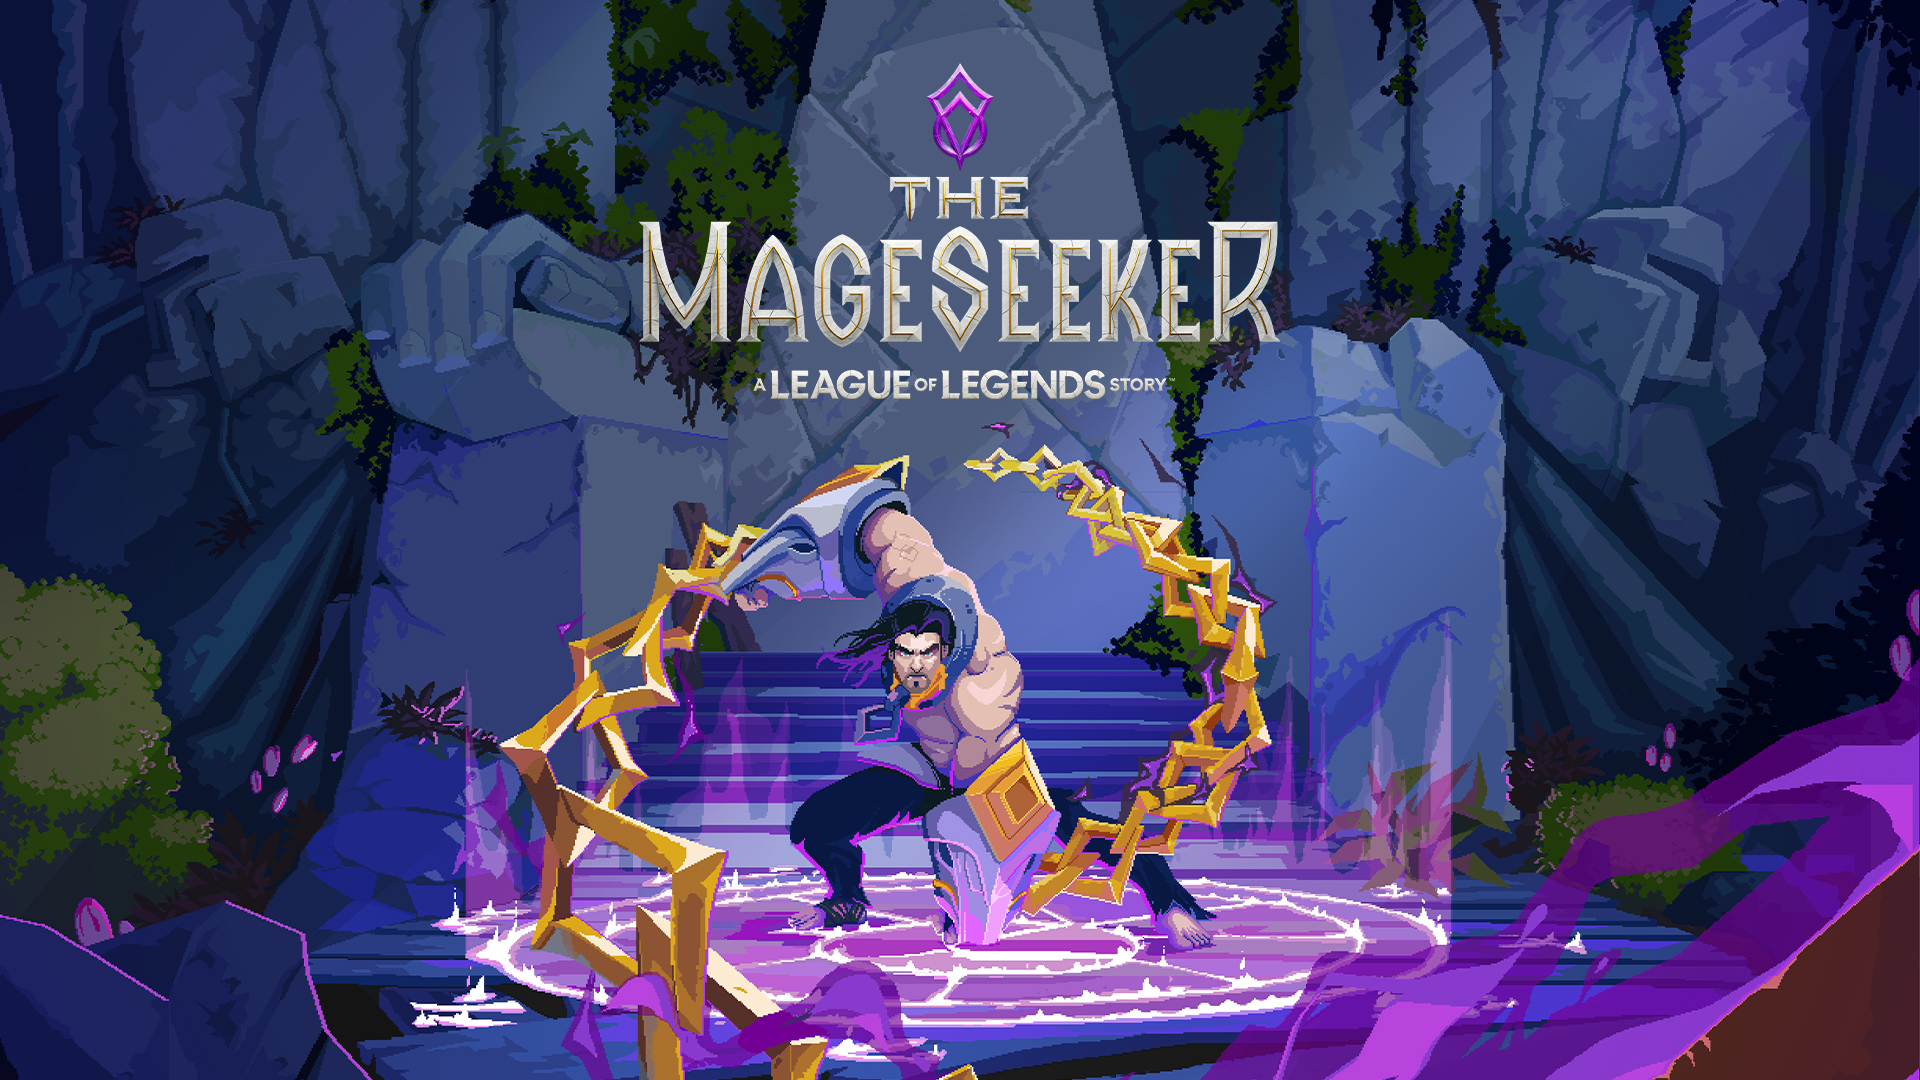 The Mageseeker: A League of Legends Story – Analysis